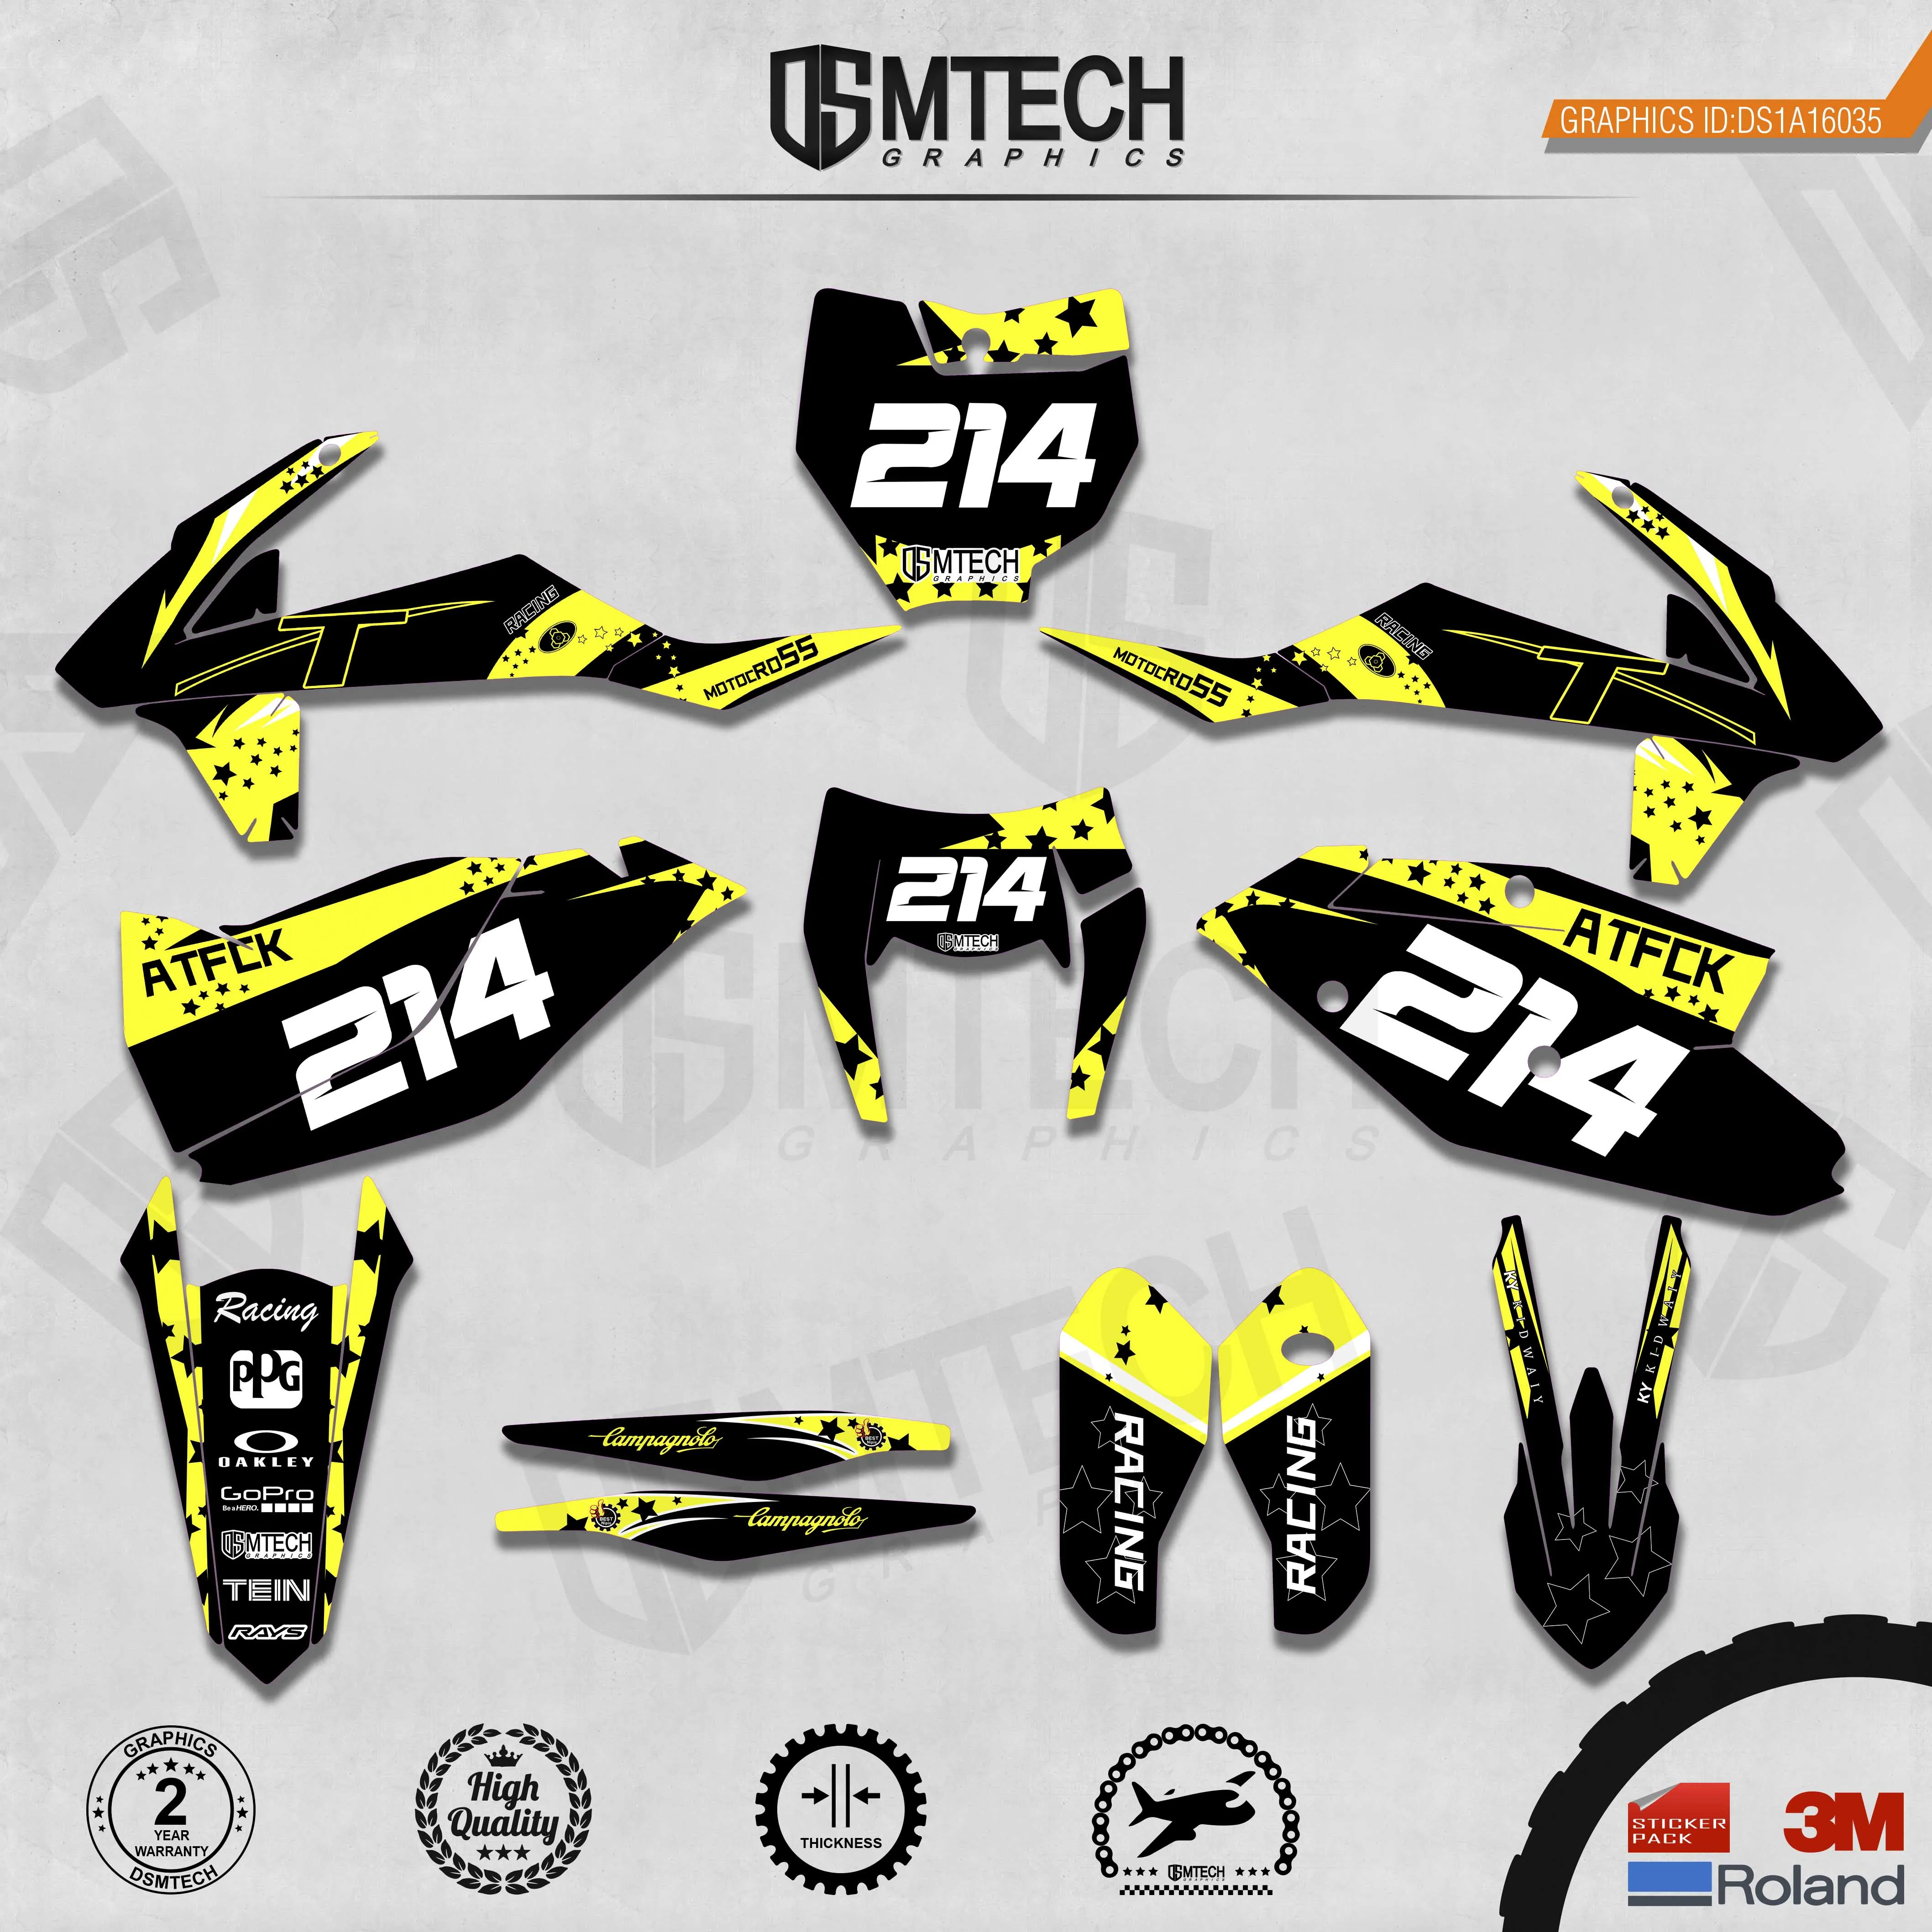 DSMTECH Customized Team Graphics Backgrounds Decals 3M Custom Stickers For KTM 2017-2019 EXC 2016-2018 SXF  035